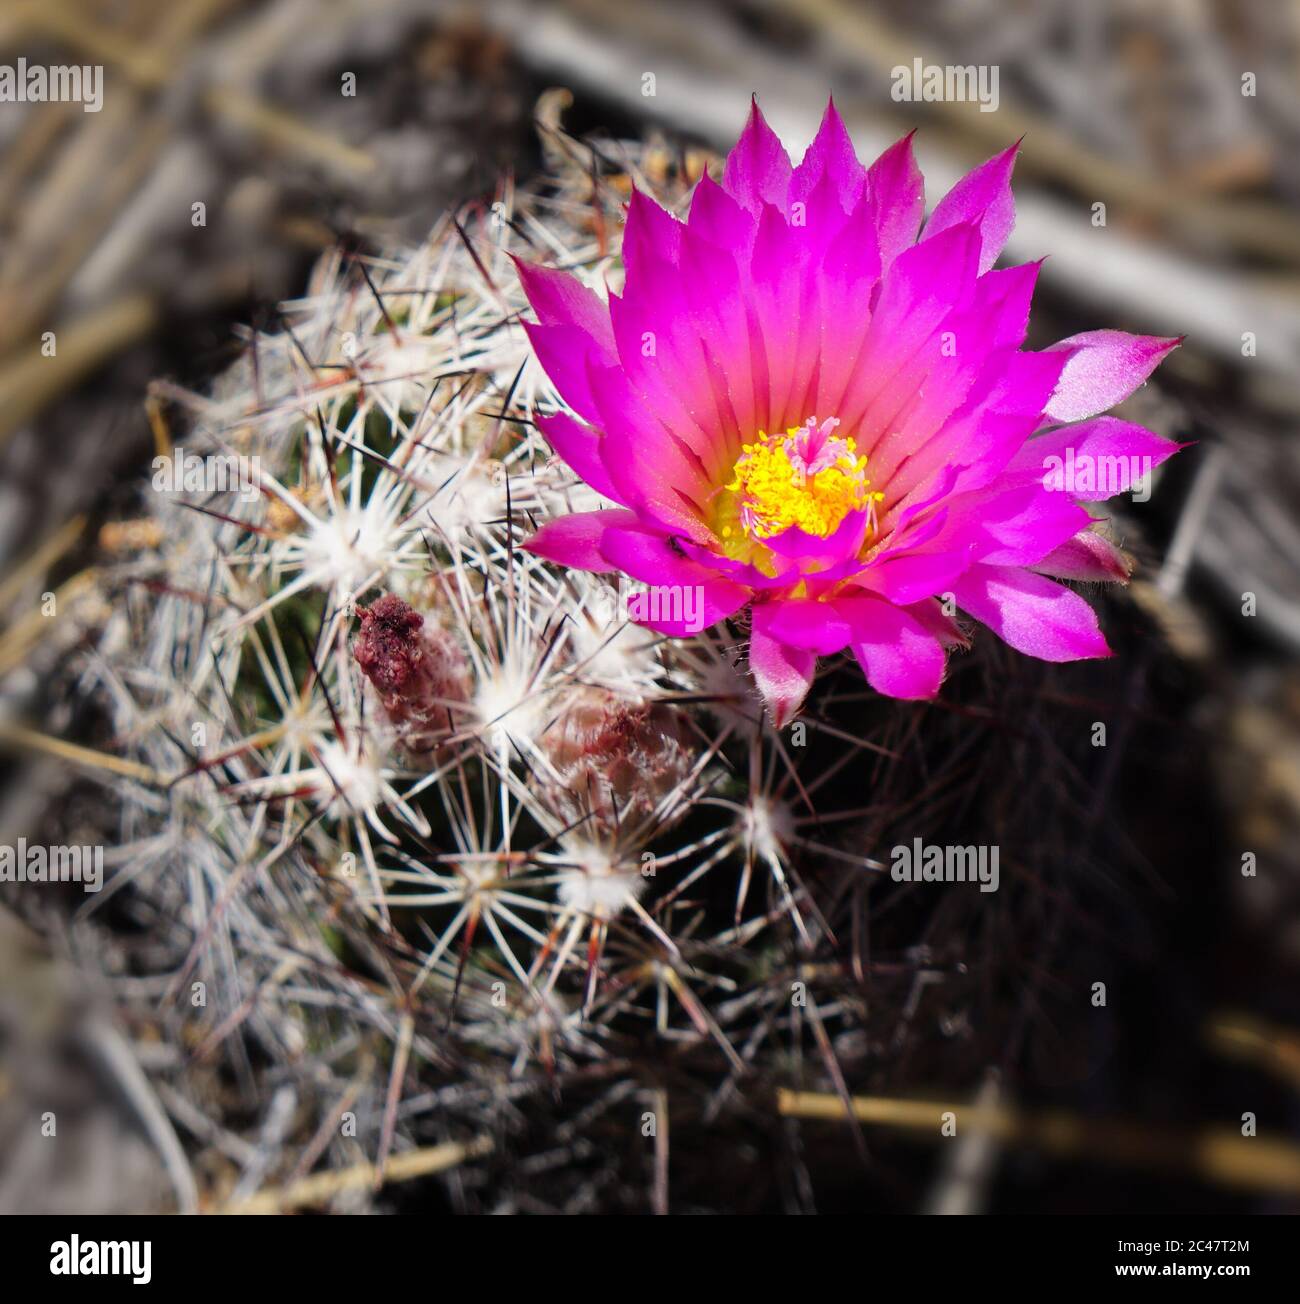 A single hot pink flower with a bright yellow center blooms on a small barrel cactus. Stock Photo